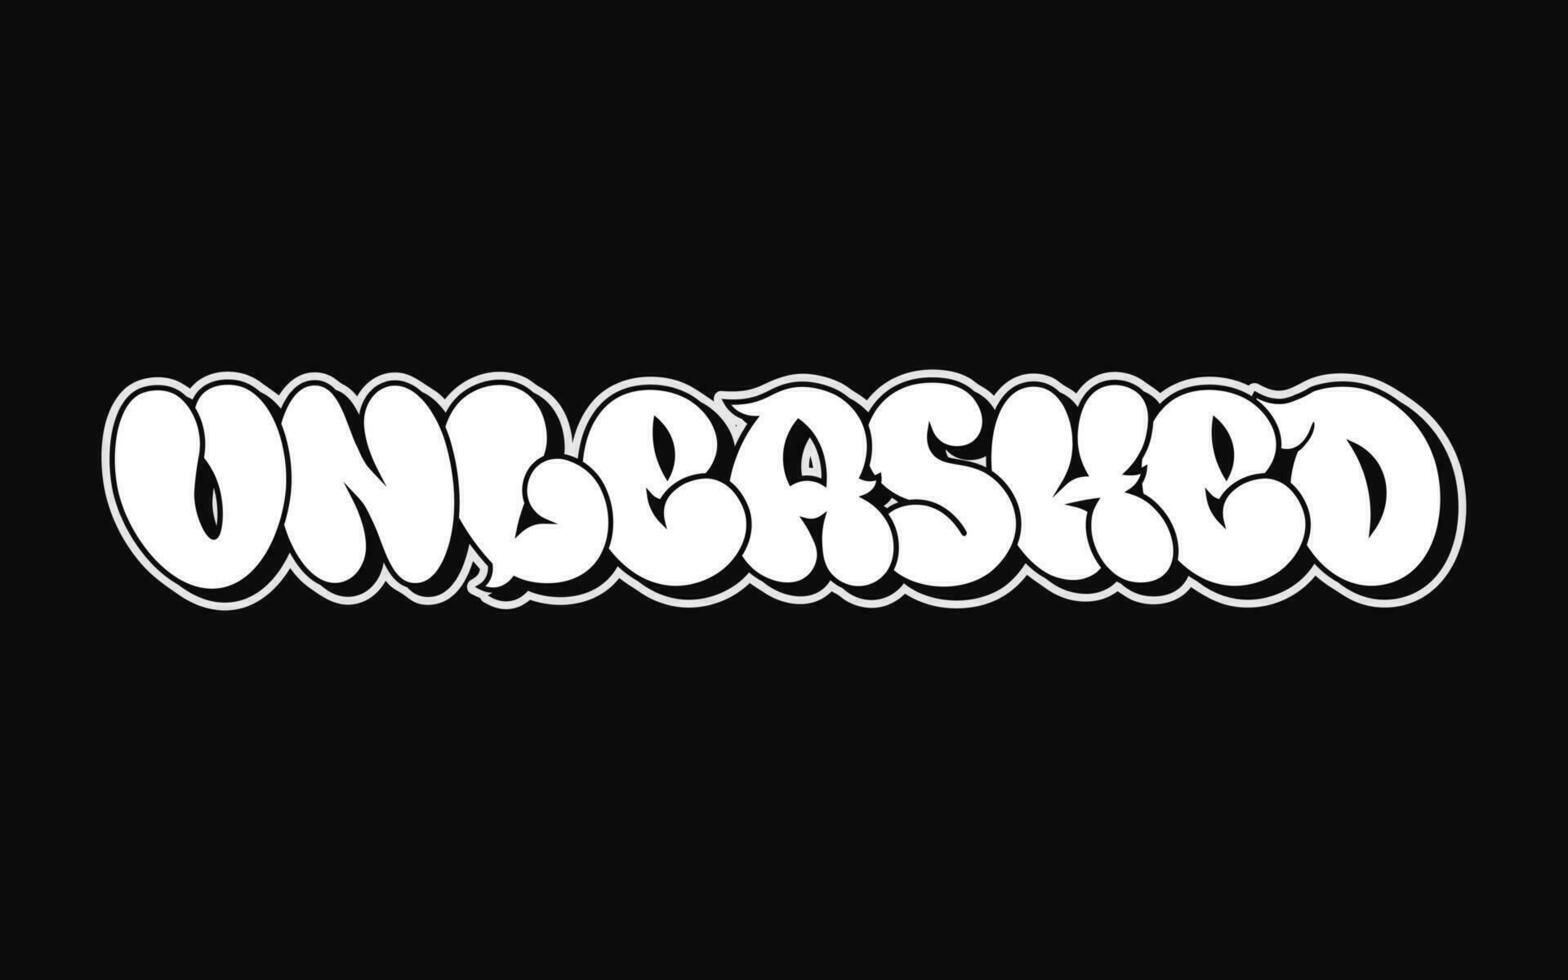 Unleashed - single word, letters graffiti style. Vector hand drawn logo. Funny cool trippy word Unleashed, fashion, graffiti style print t-shirt, poster concept